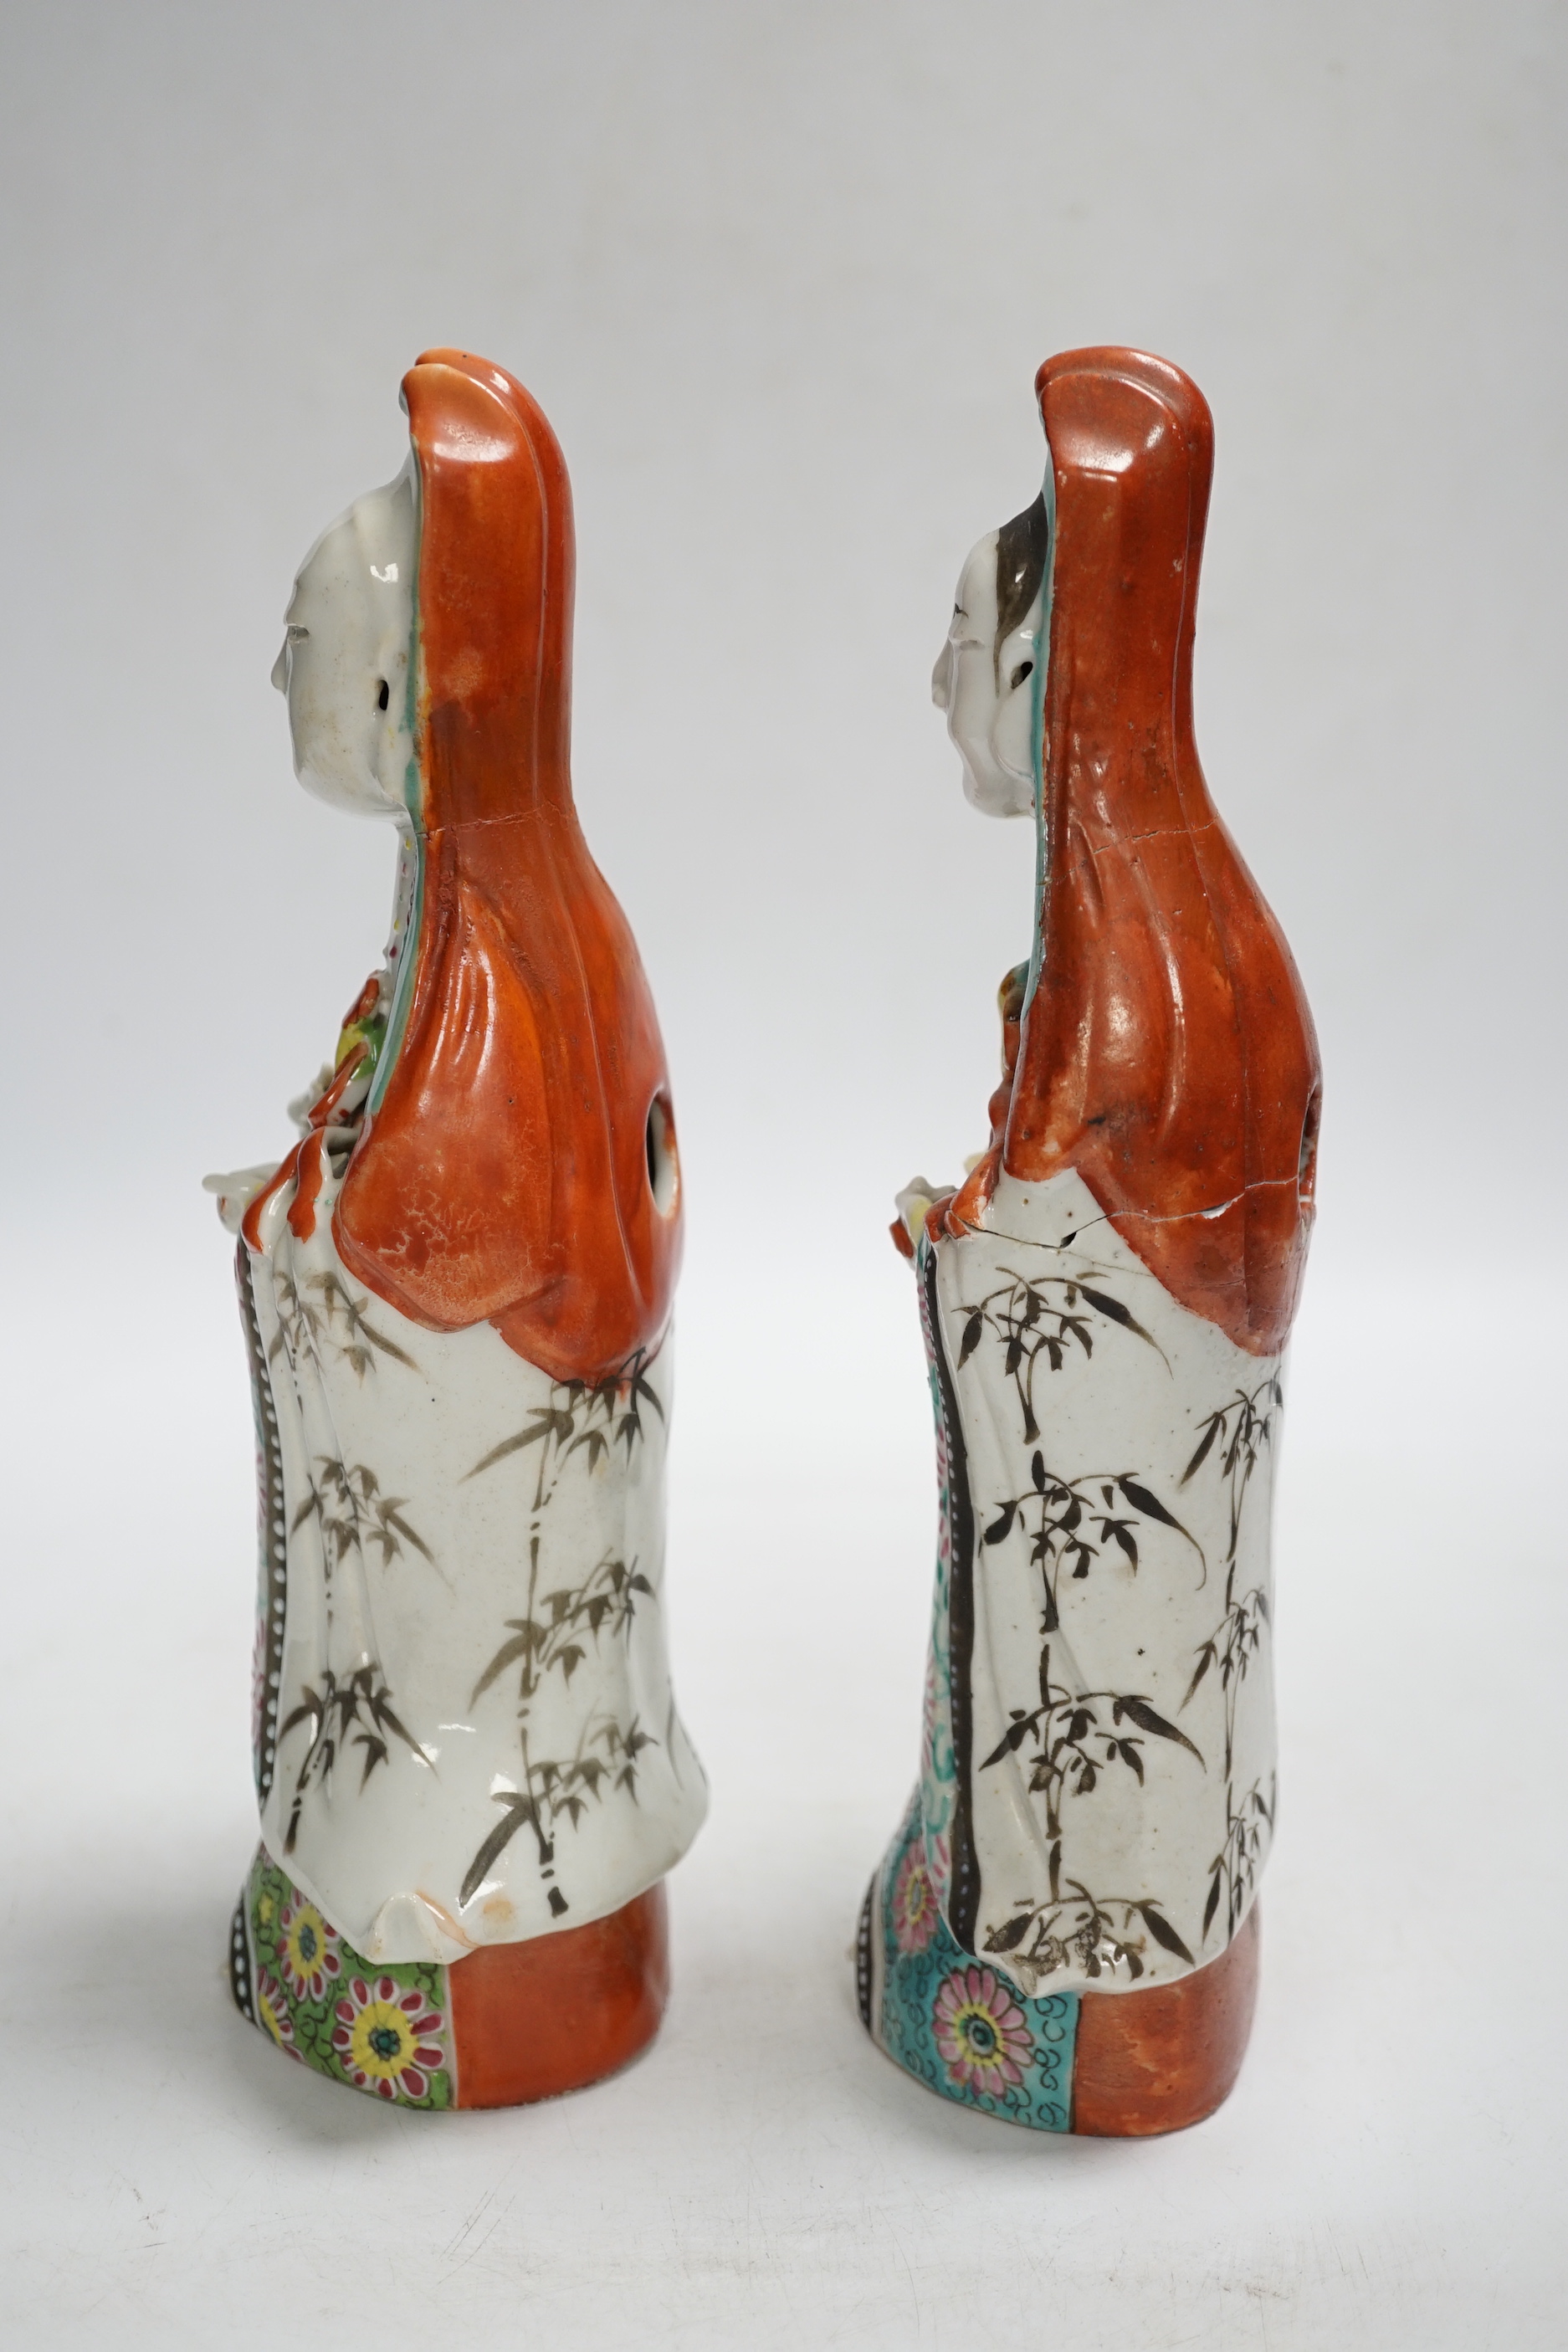 Two late 18th century Chinese enamelled porcelain figures, 23.5cm